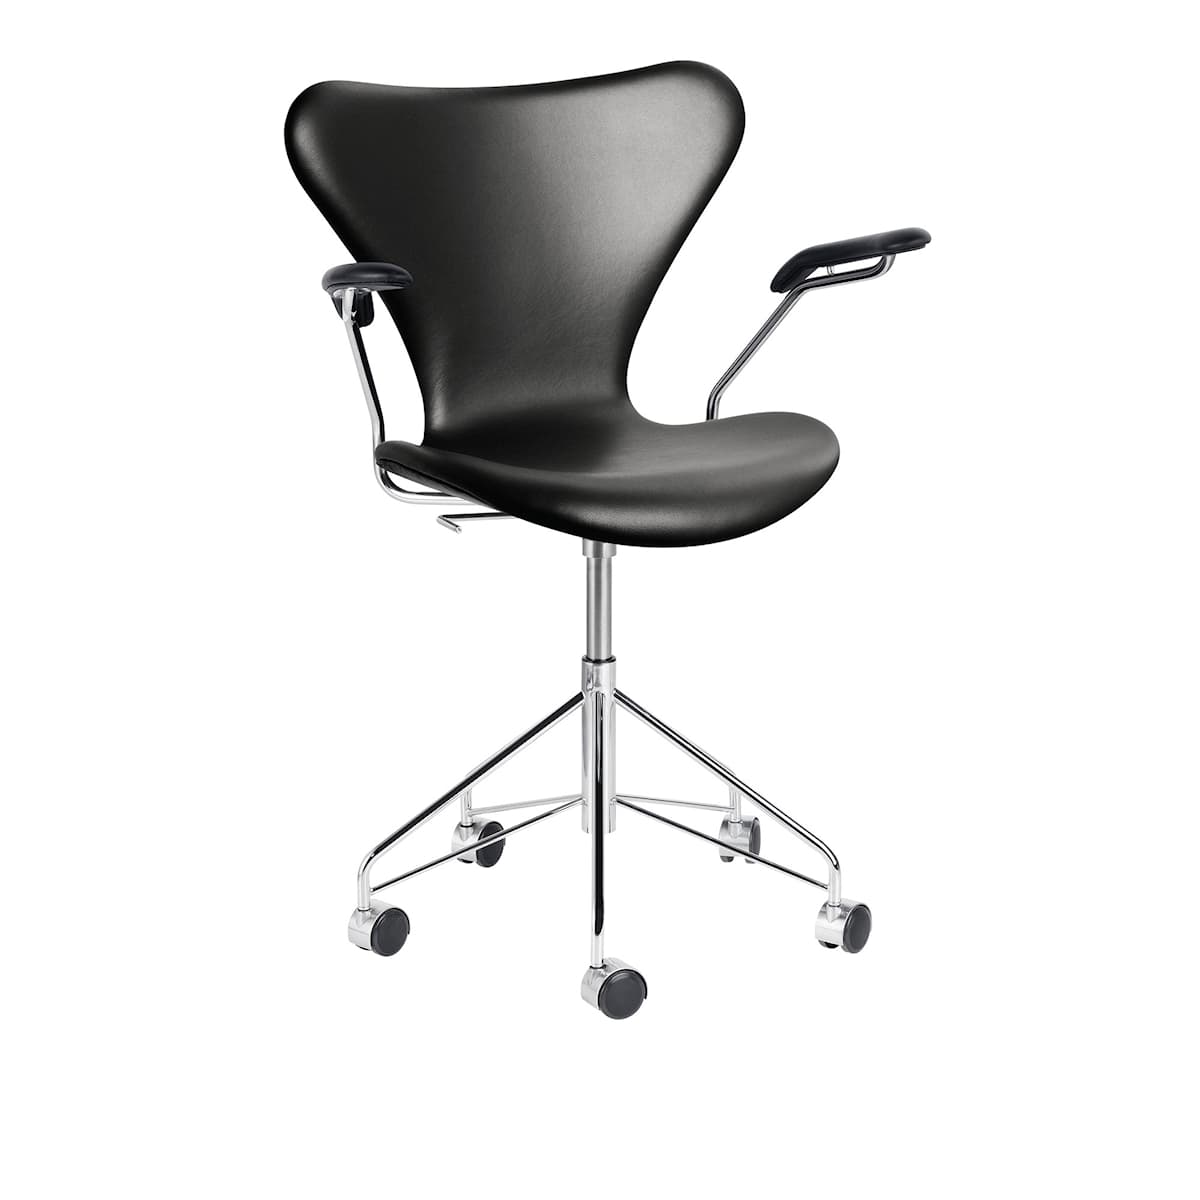 3217 Series 7 Office Chair Fully upholstered